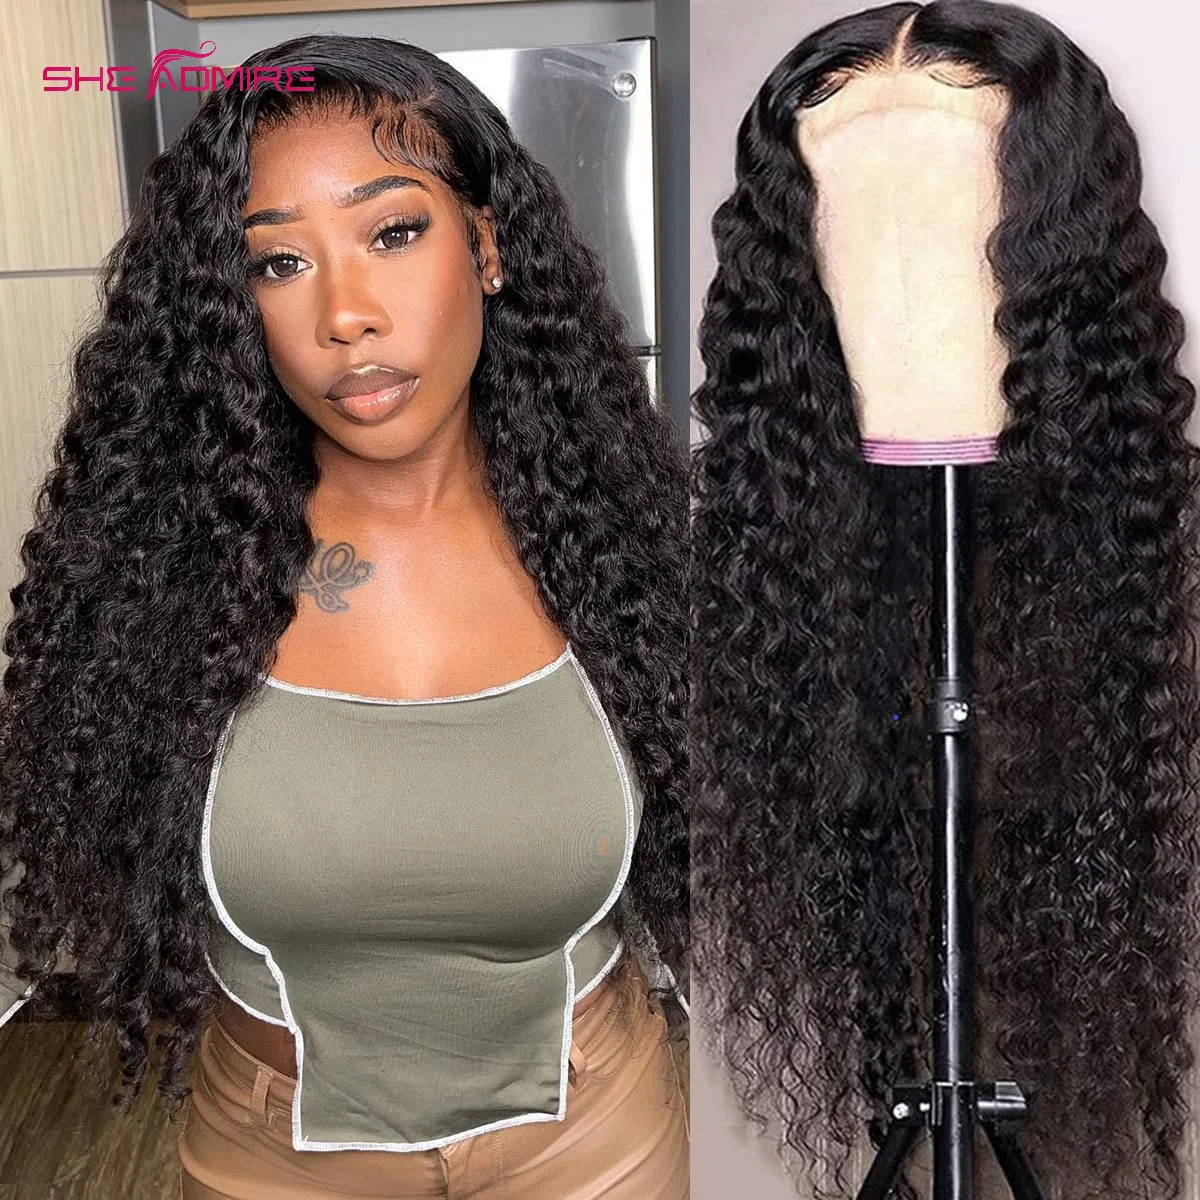 Water Wave Human Hair Wig 13X4 Transparent Lace Front Wigs for Black Women Natural Wet And Wavy Curly Short Bob Wig Sale